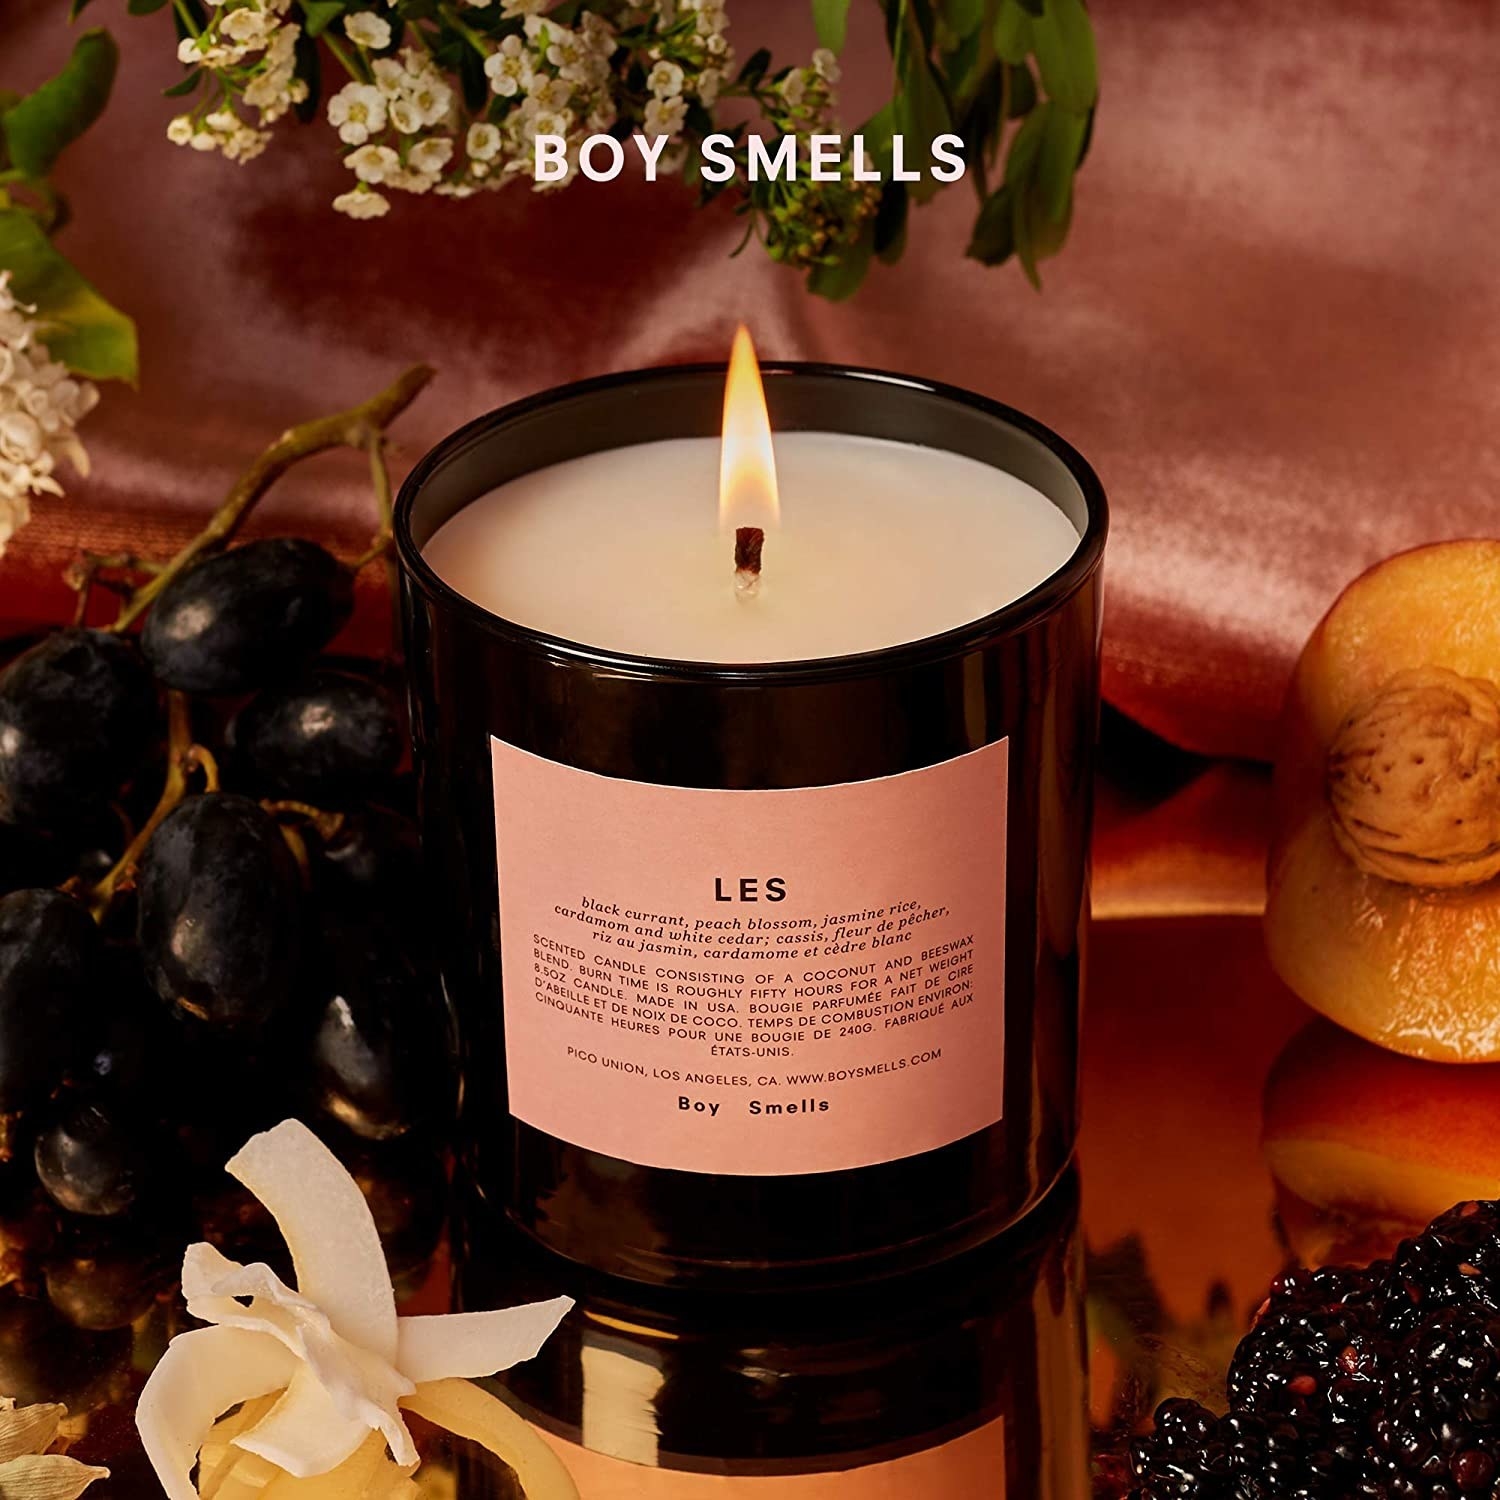 A lit LES candle on display with flowers, peaches, and grapes